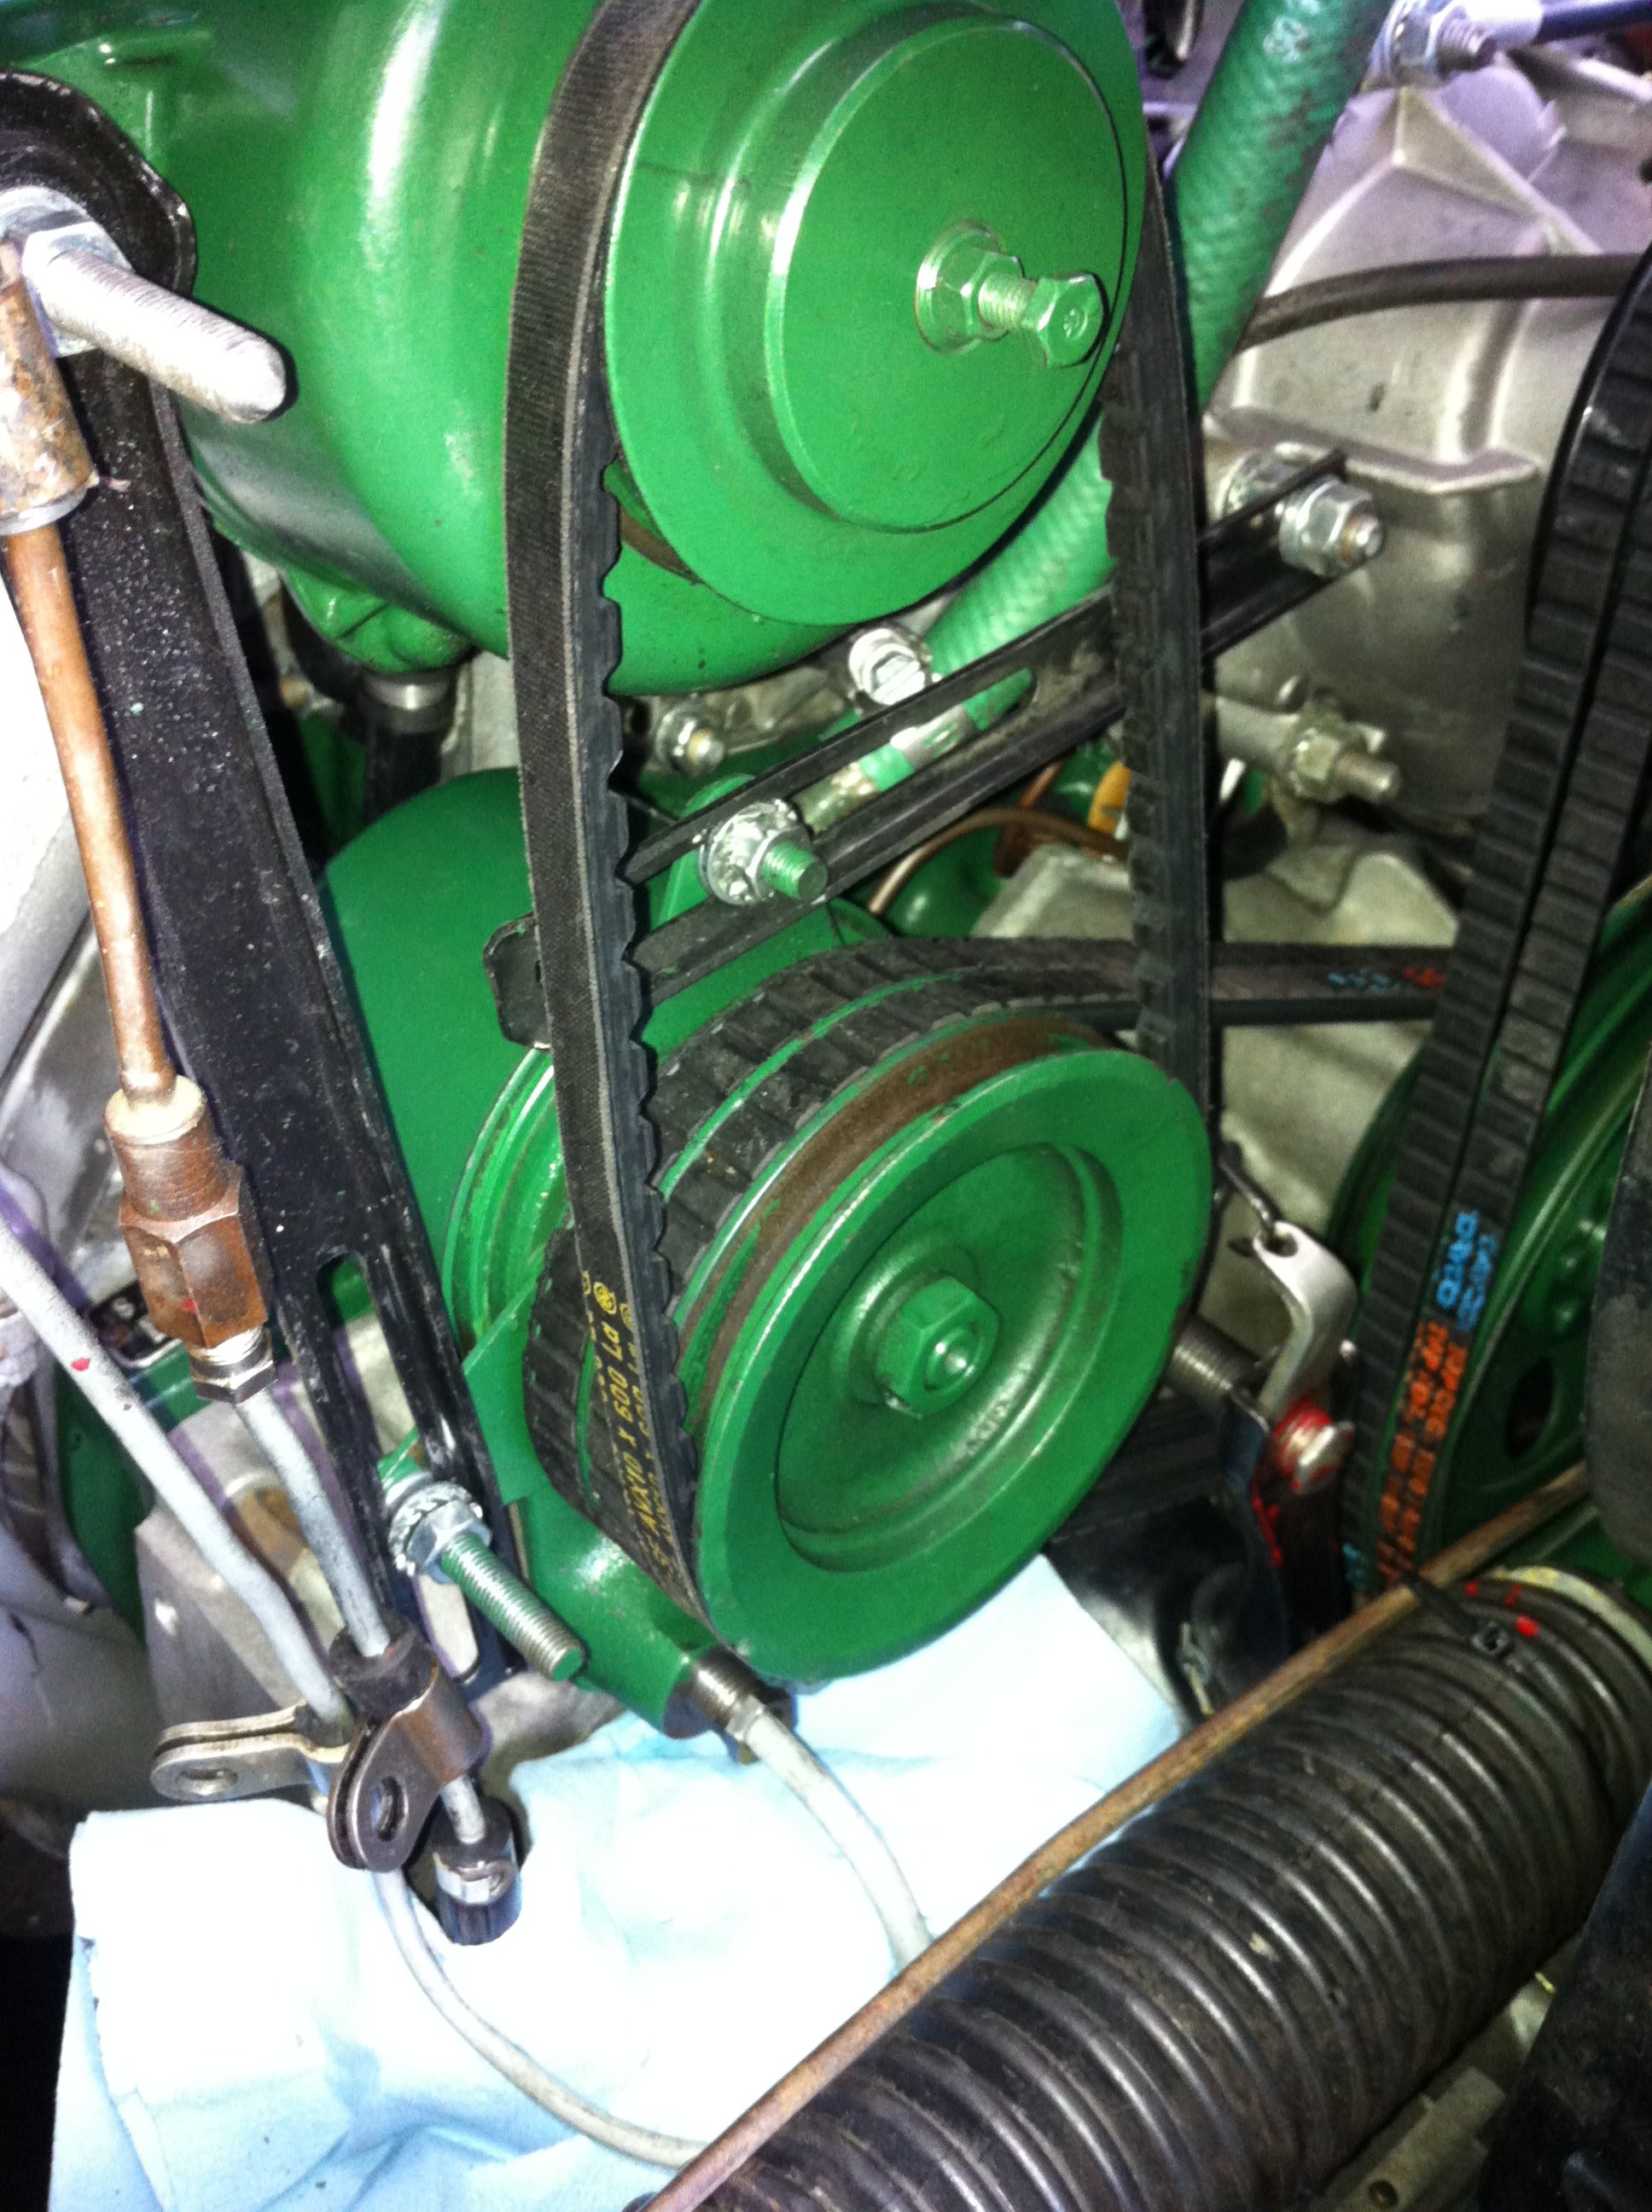 The main hydraulic pump is driven by two belts and it drives the clutch regulator (above the pump) with another belt.